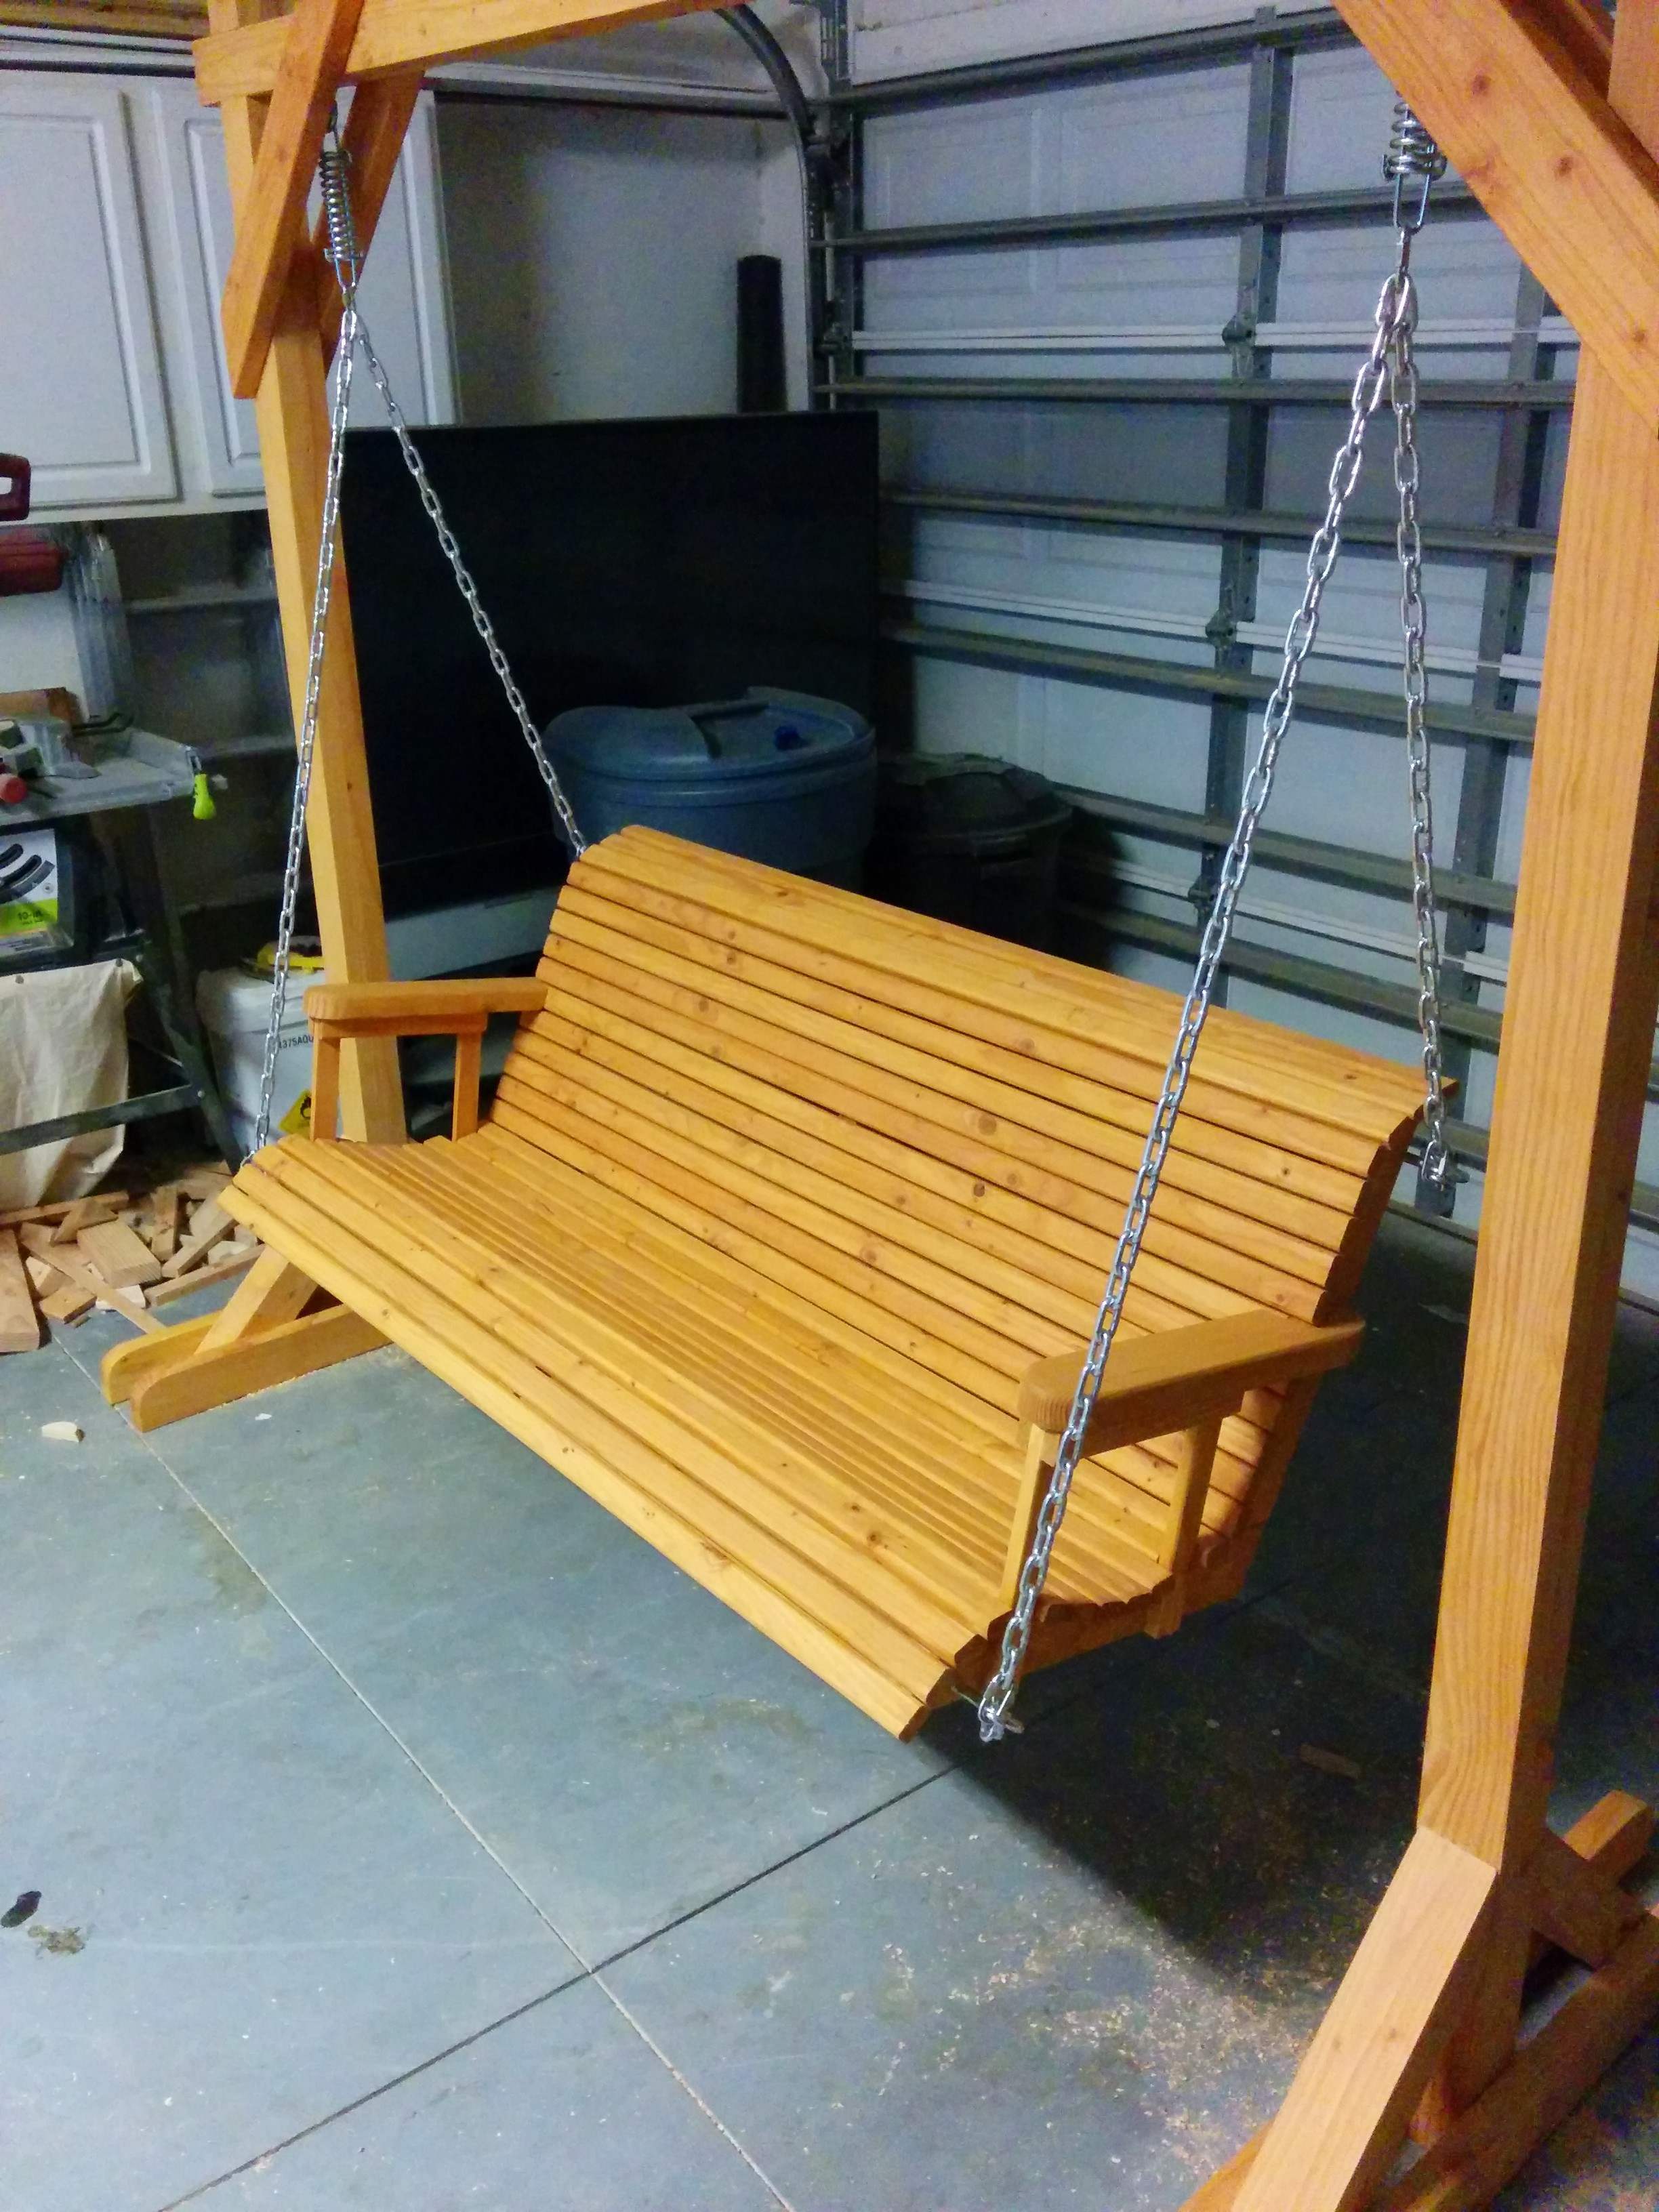 DIY Swing Bench | MyOutdoorPlans | Free Woodworking Plans and Projects